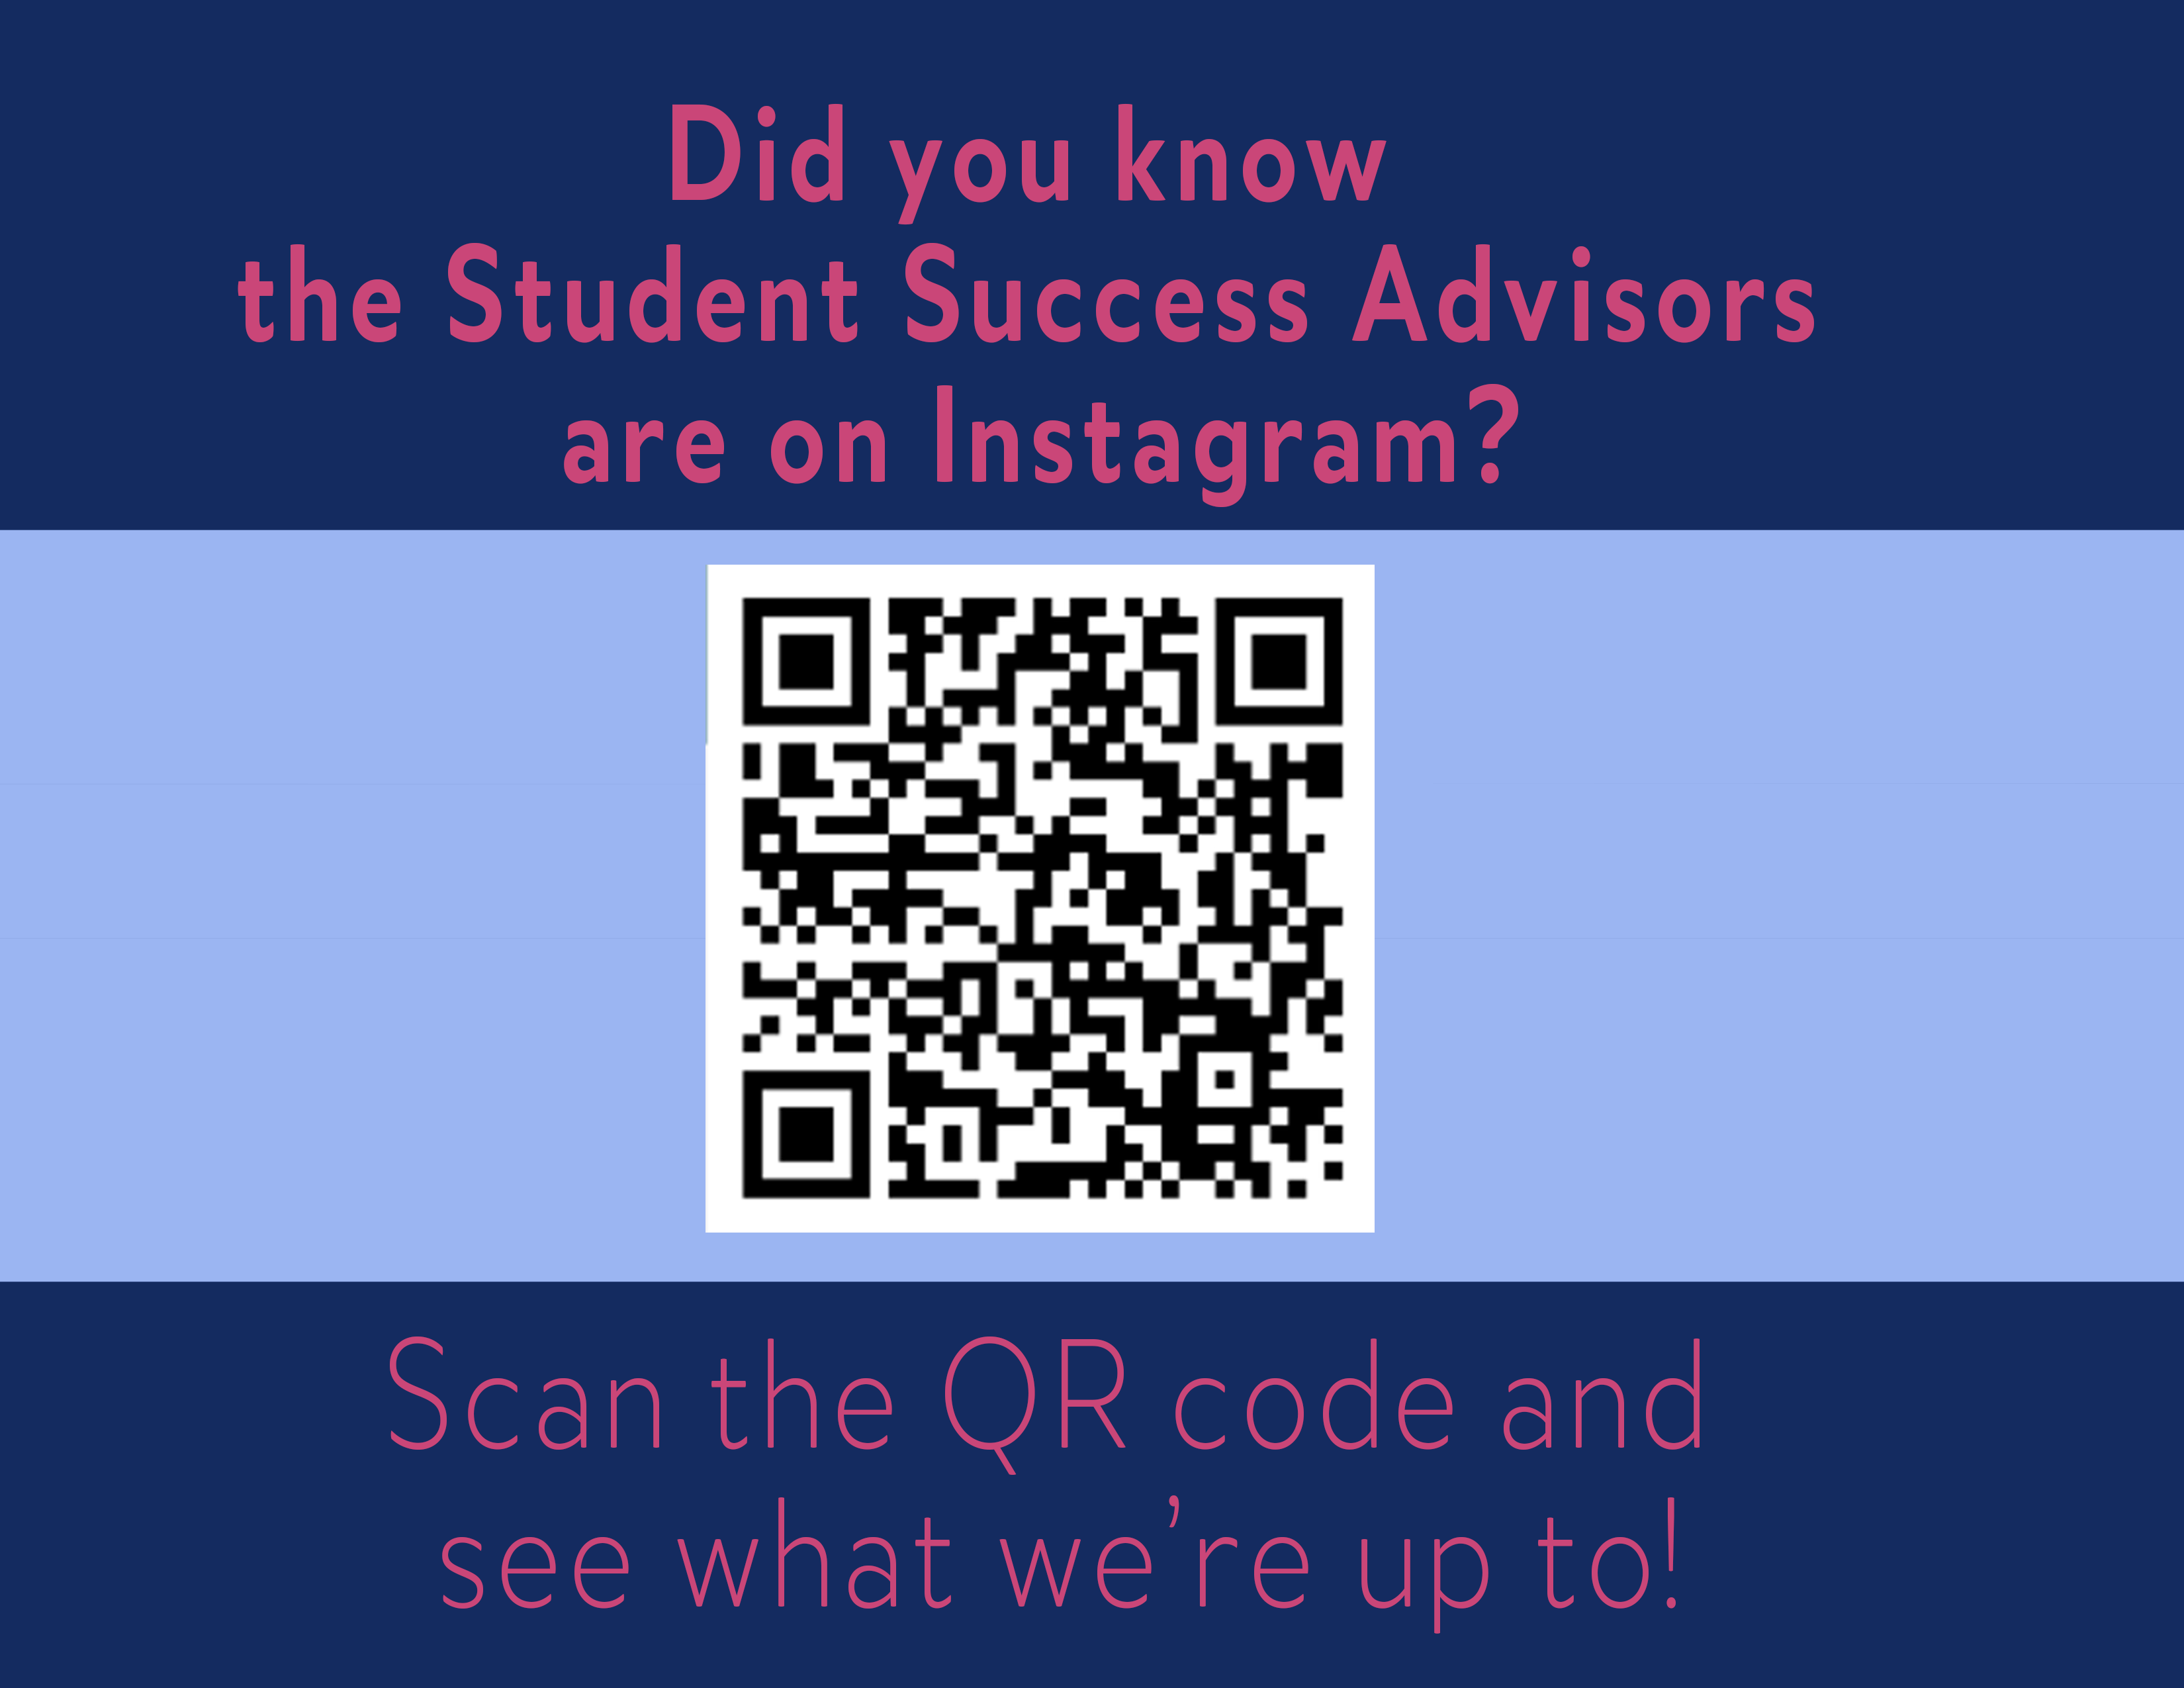 The Student Success Advisors are on Instagram!